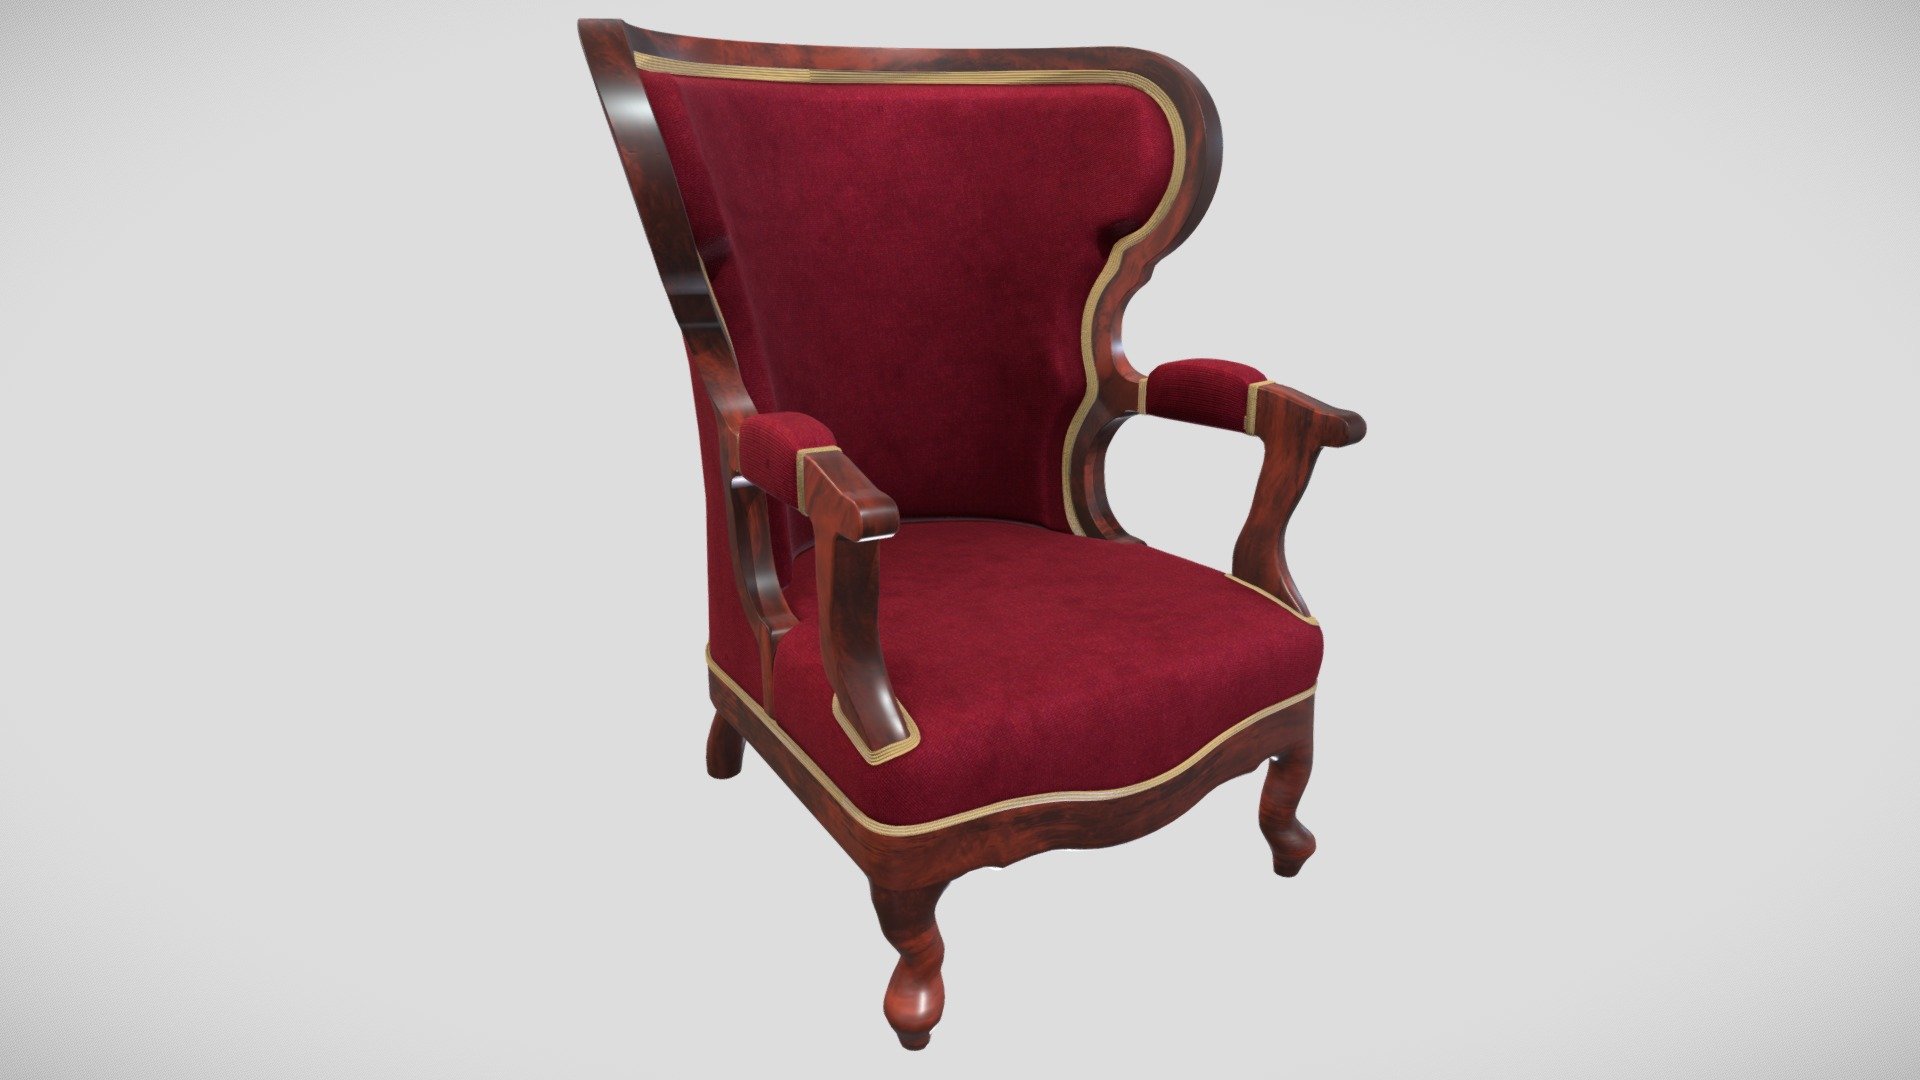 Gothic armchair for the living room with decent decorations. As a material, we chose dark acacia wood to highlight the decorations and velvet on the seating area. The model fits perfectly into any living room of the late 19th century. 

All models have a LOD and their own collider for easy use as game props. Packed Ambient oclusion (R), roughness (G) and metalic (B) and Unreal engine 4 project are also included 3d model